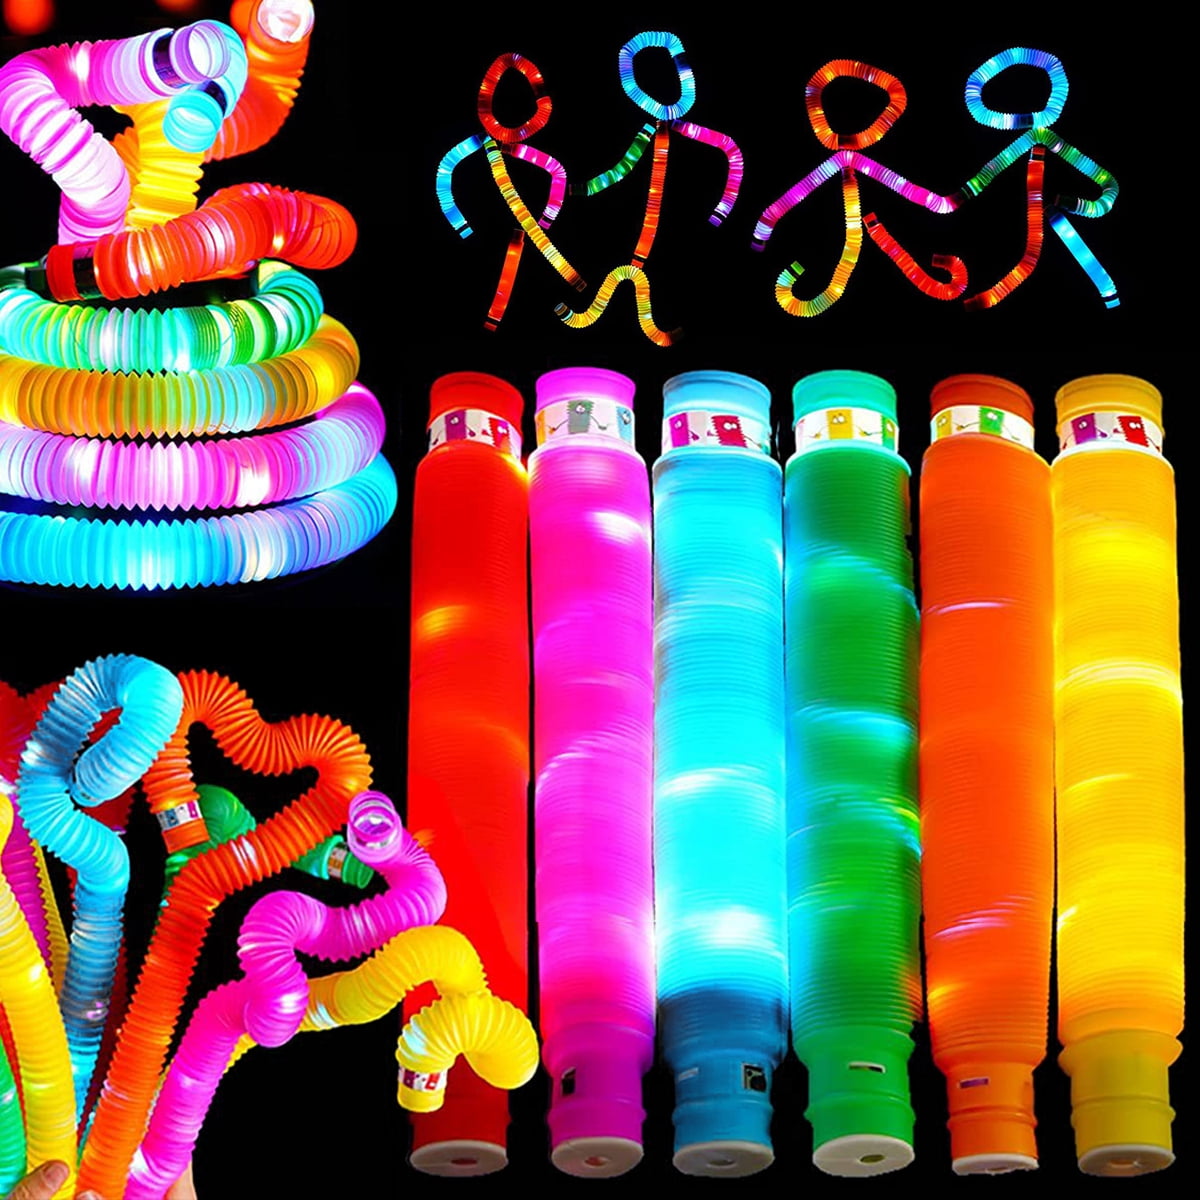 LED Light up Pop Tubes, Glow in The Dark Party Supplies Light up Glow  Sticks for Birthday, Wedding, Concerts, DJ (6 Pack) 